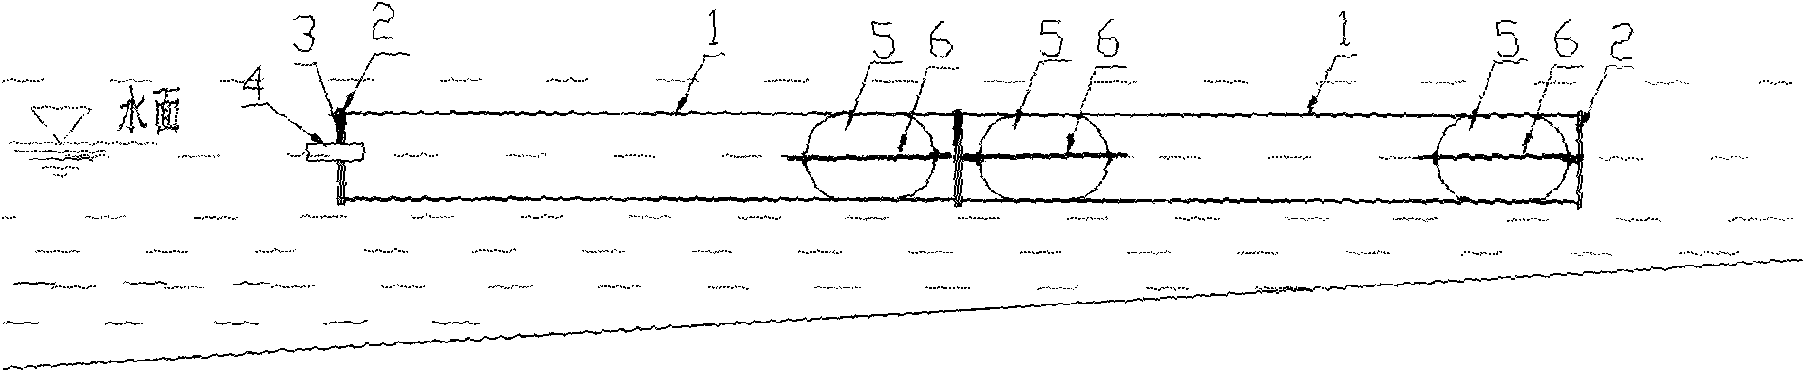 Method for installing pipelines assisted by air bags